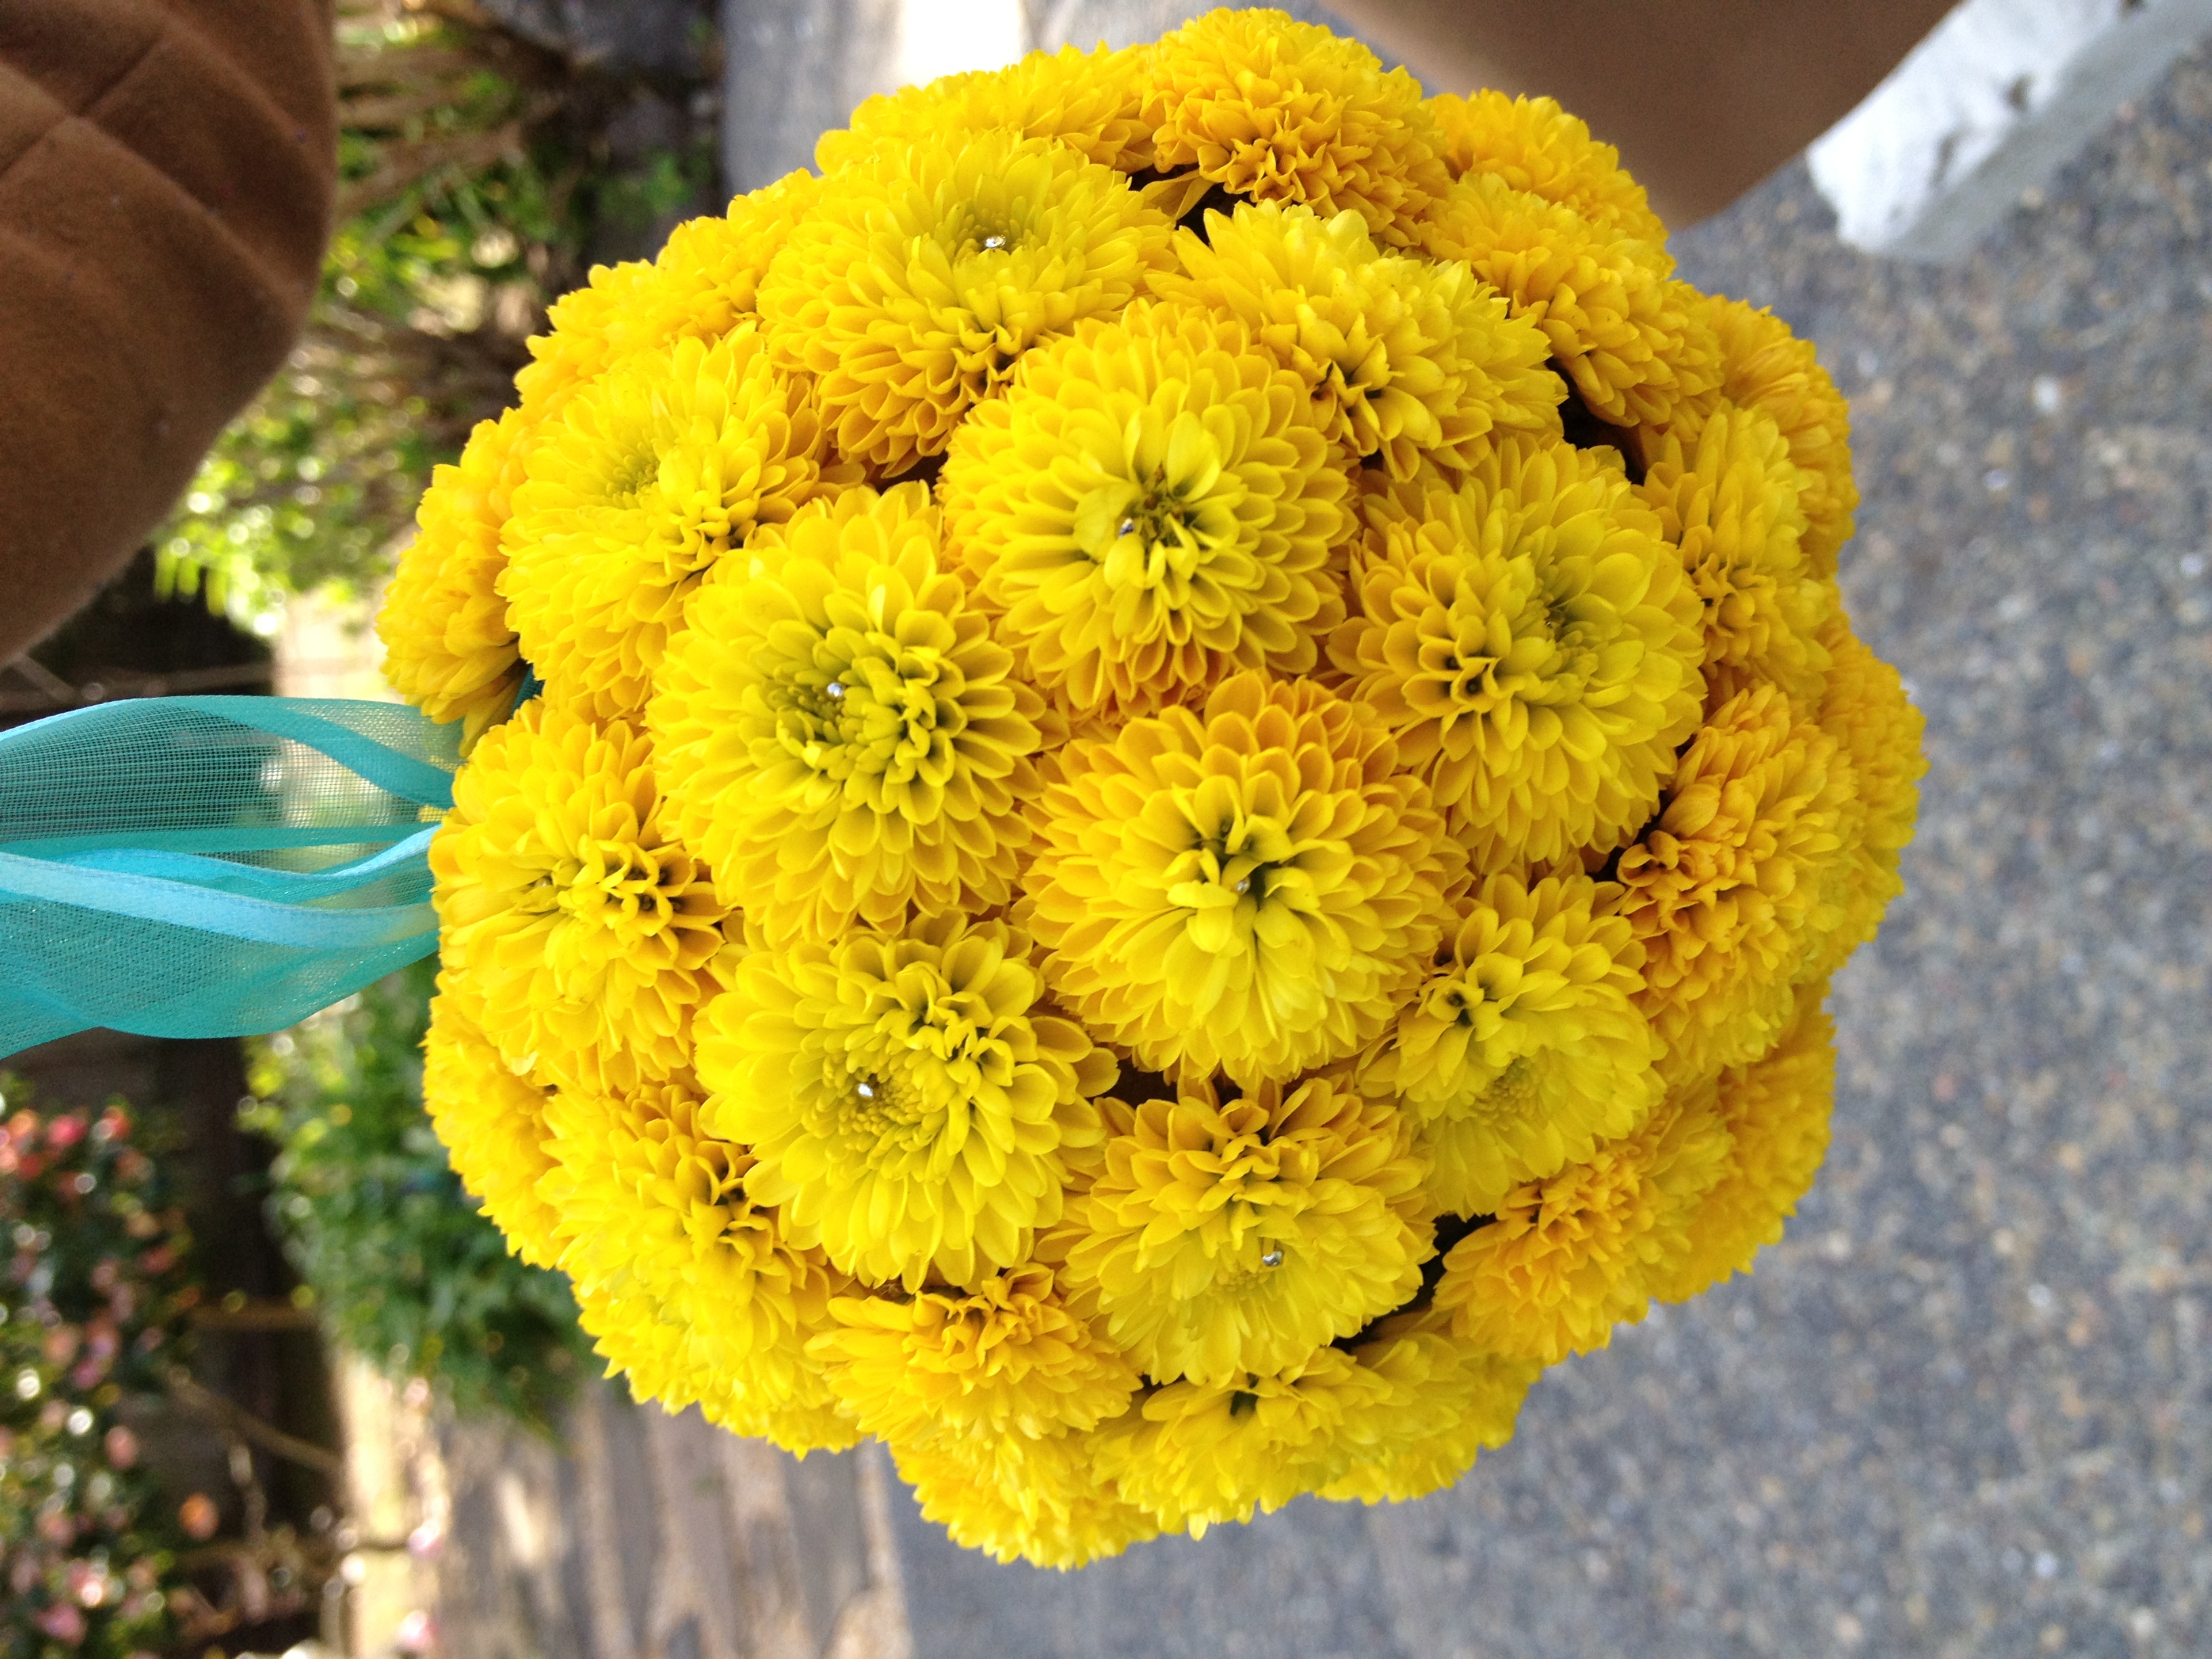 Yellow Ball Flower Image collections - Flower Decoration Ideas